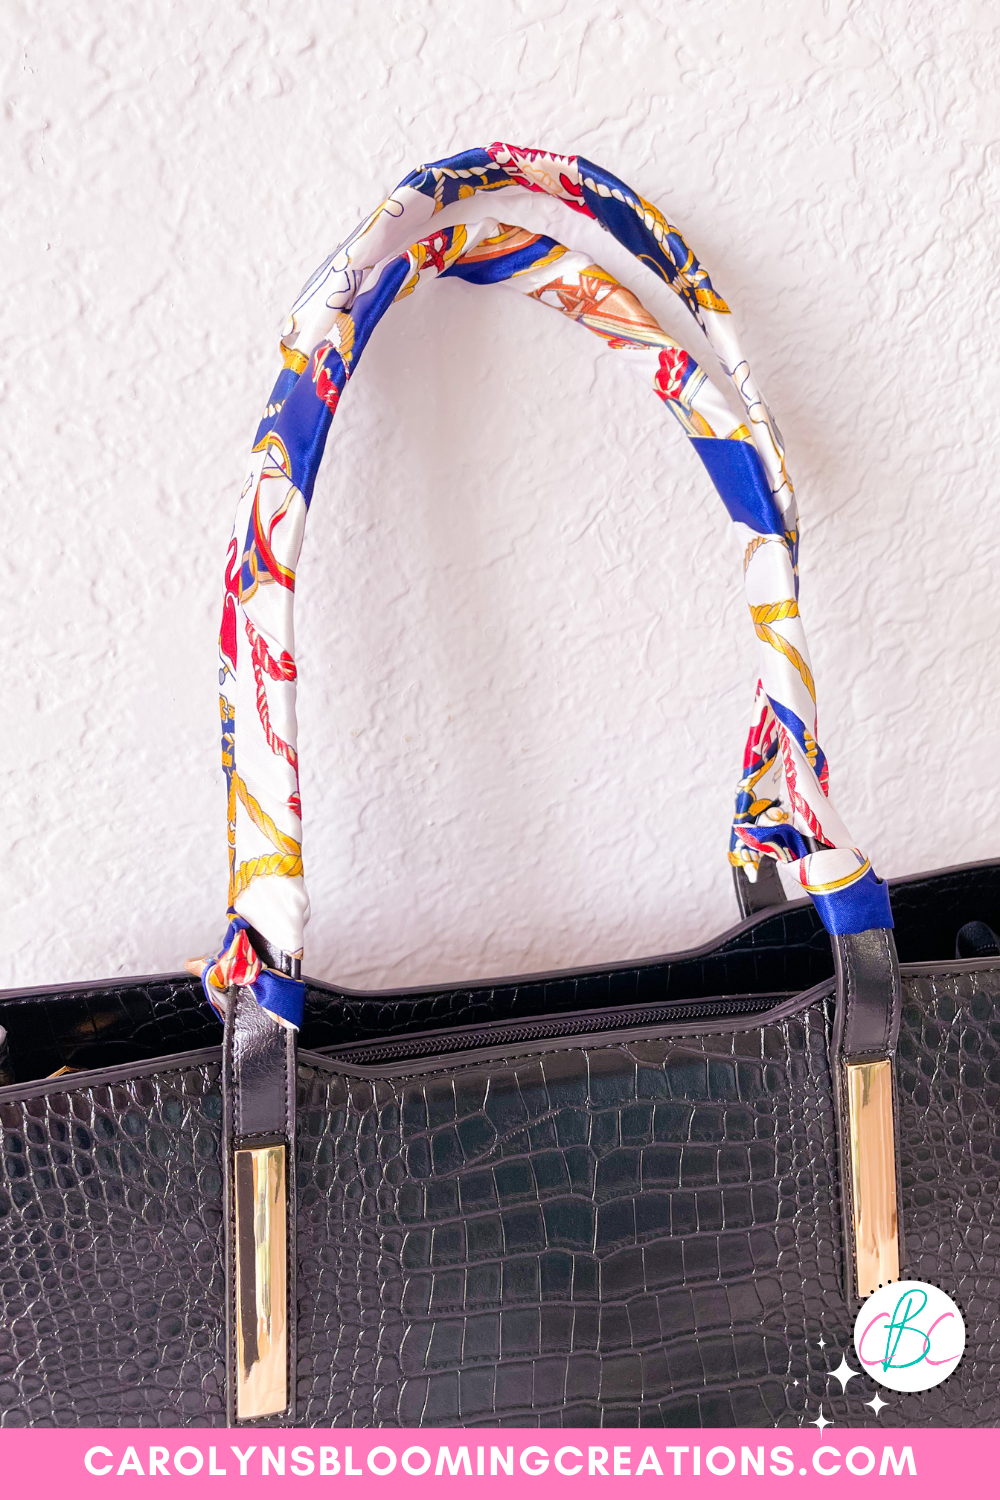 DIY: How to Use a Scarf as a Purse Strap